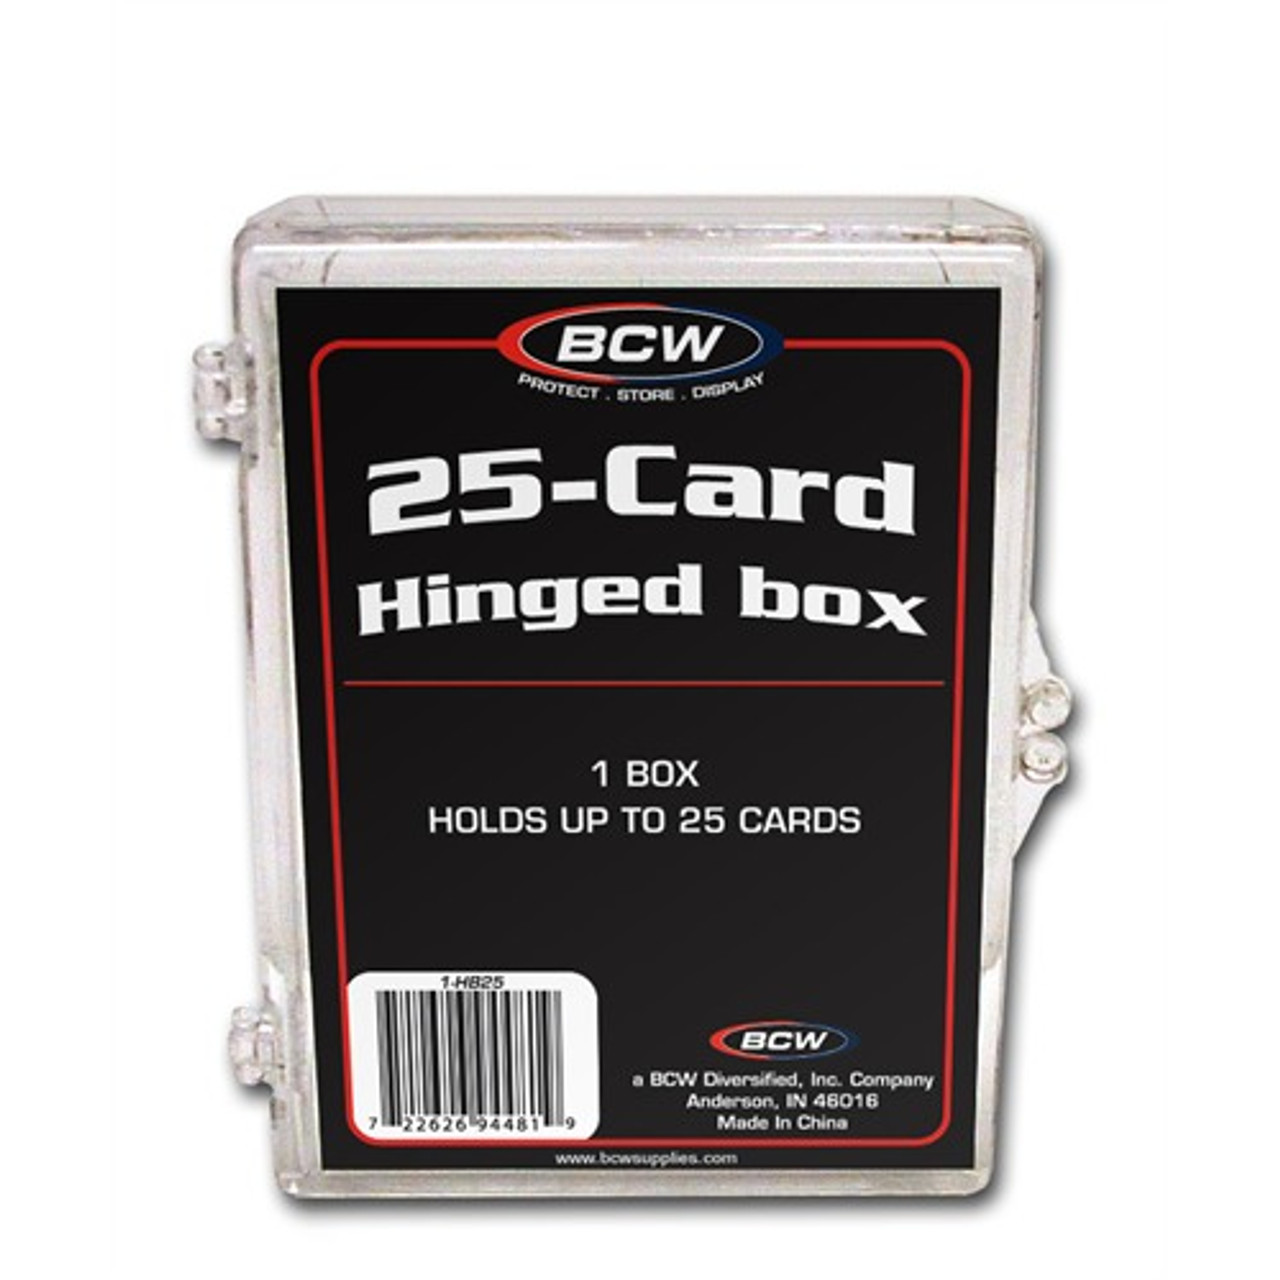 BCW 25-card Hinged Box / Case of 100